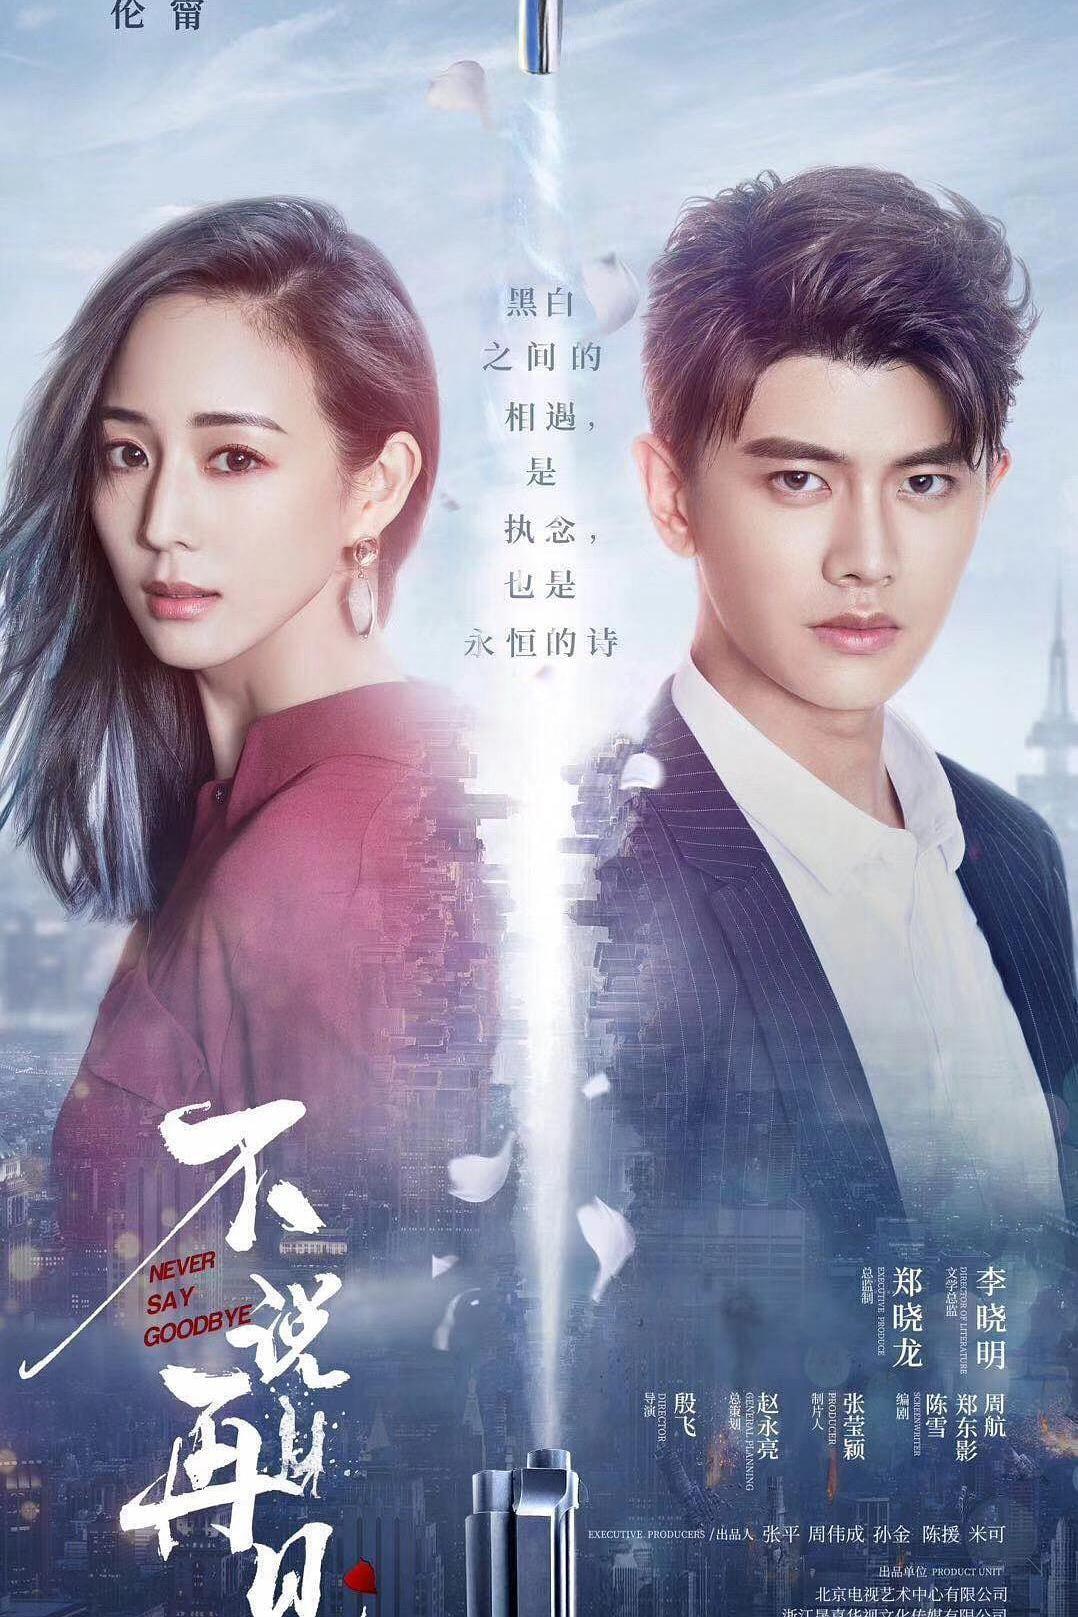 TV ratings for Never Say Goodbye (不说再见) in South Africa. iqiyi TV series